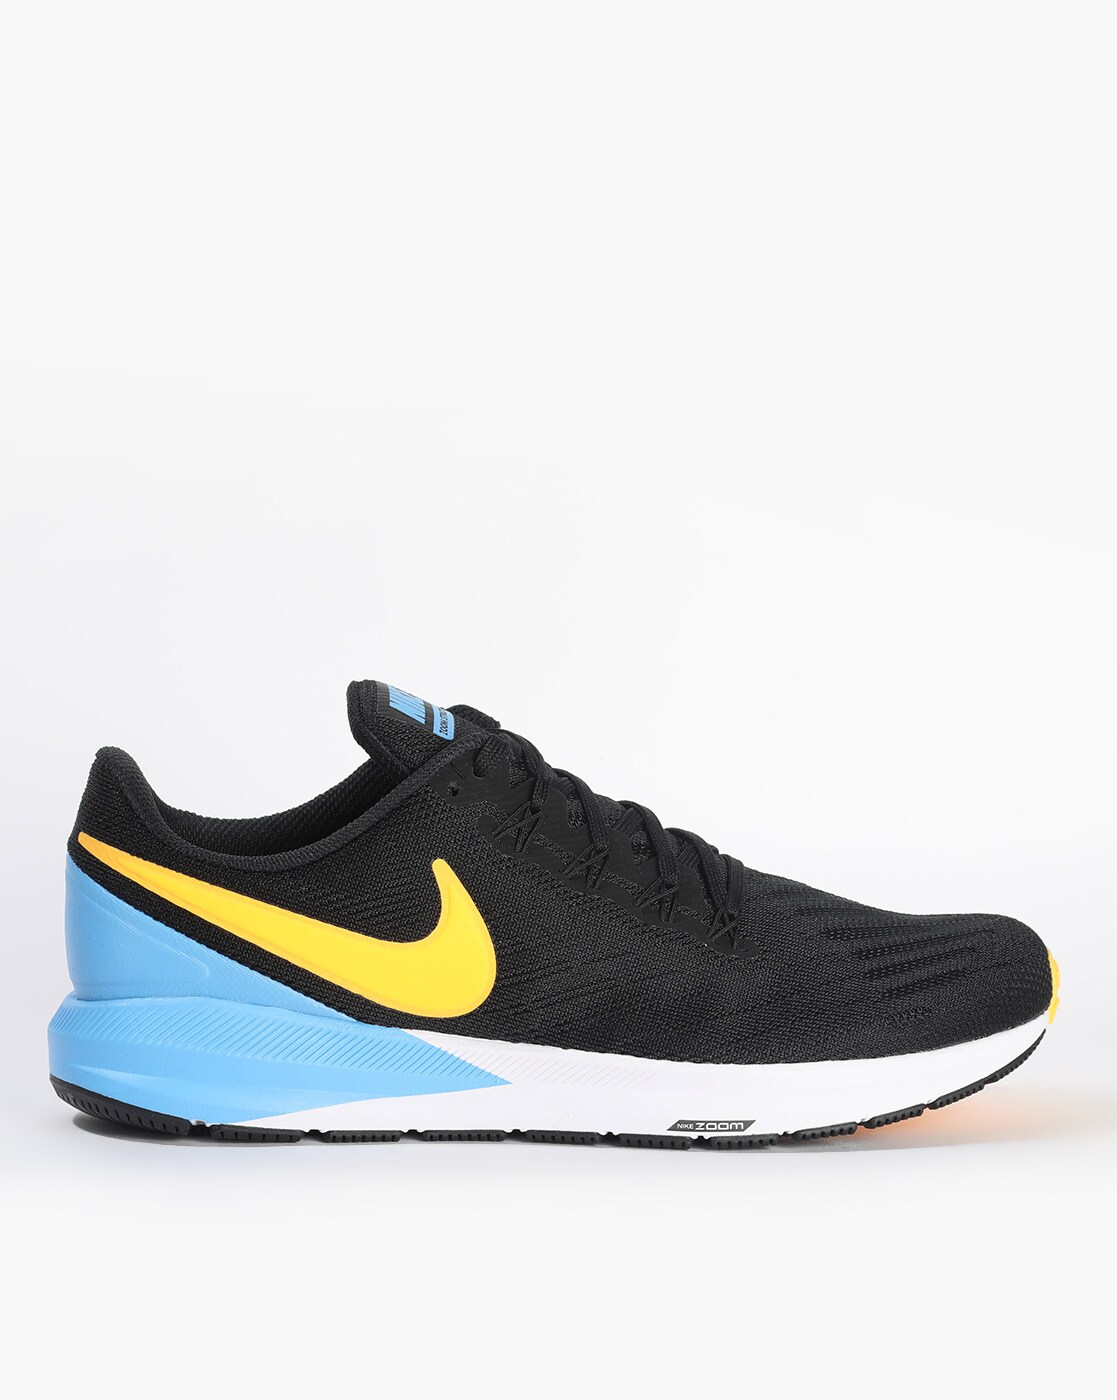 nike zoom structure 22 price